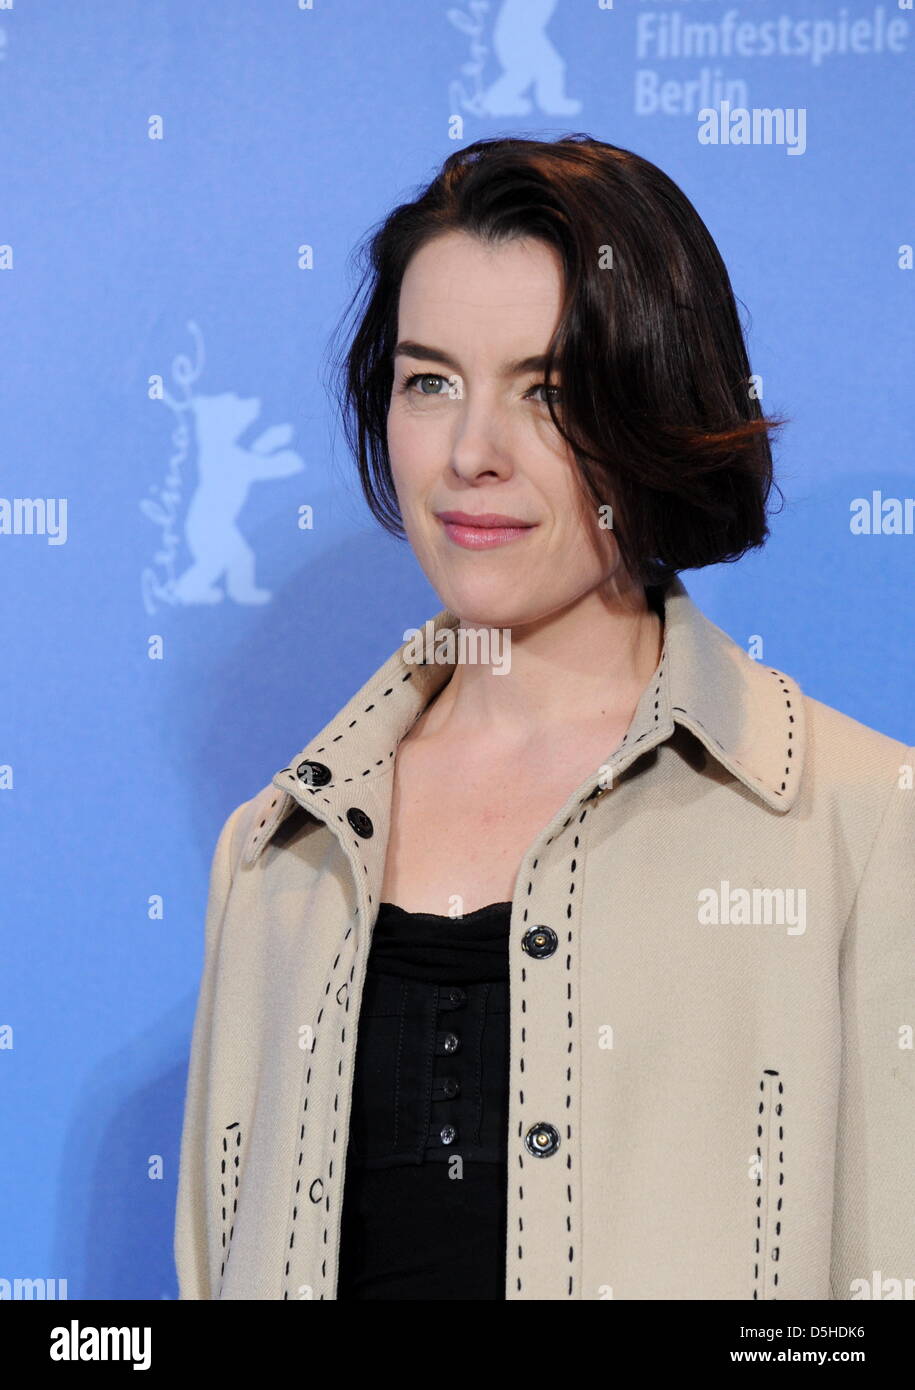 British actress Olivia Williams attends the photocall of the film 'The Ghost Writer' running in competition during the 60th Berlinale international film festival on Friday 12 February 2010 in Berlin. The festival runs until 21 Febuary 2010. Photo: Tim Brakemeier dpa/lbn Stock Photo